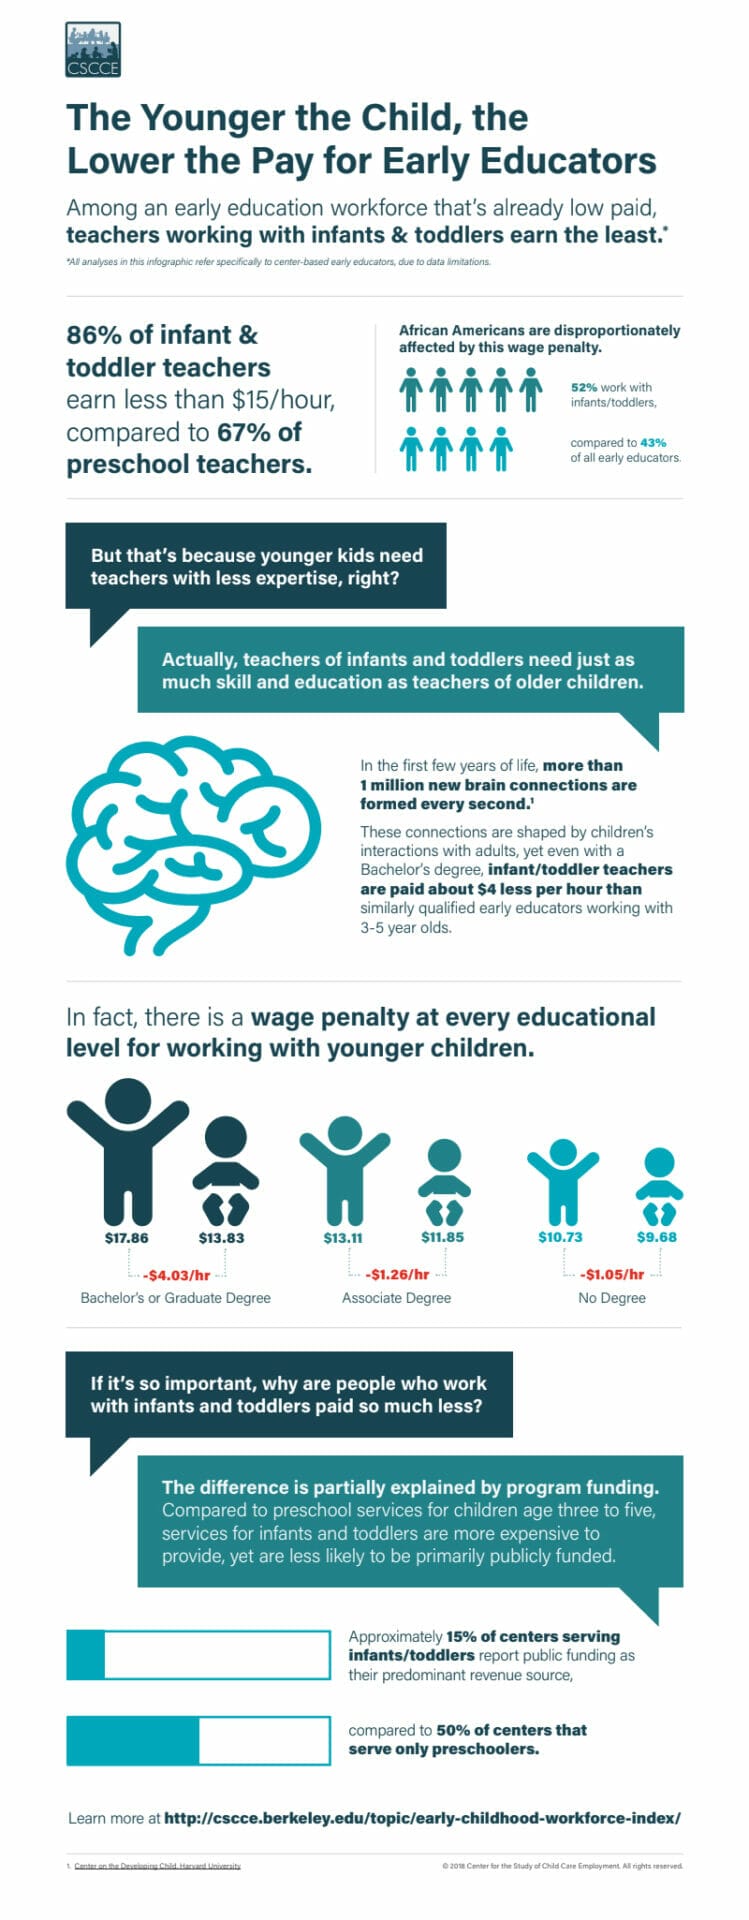 An infographic that explains the wage gap between early educators and why there is a disproportion.